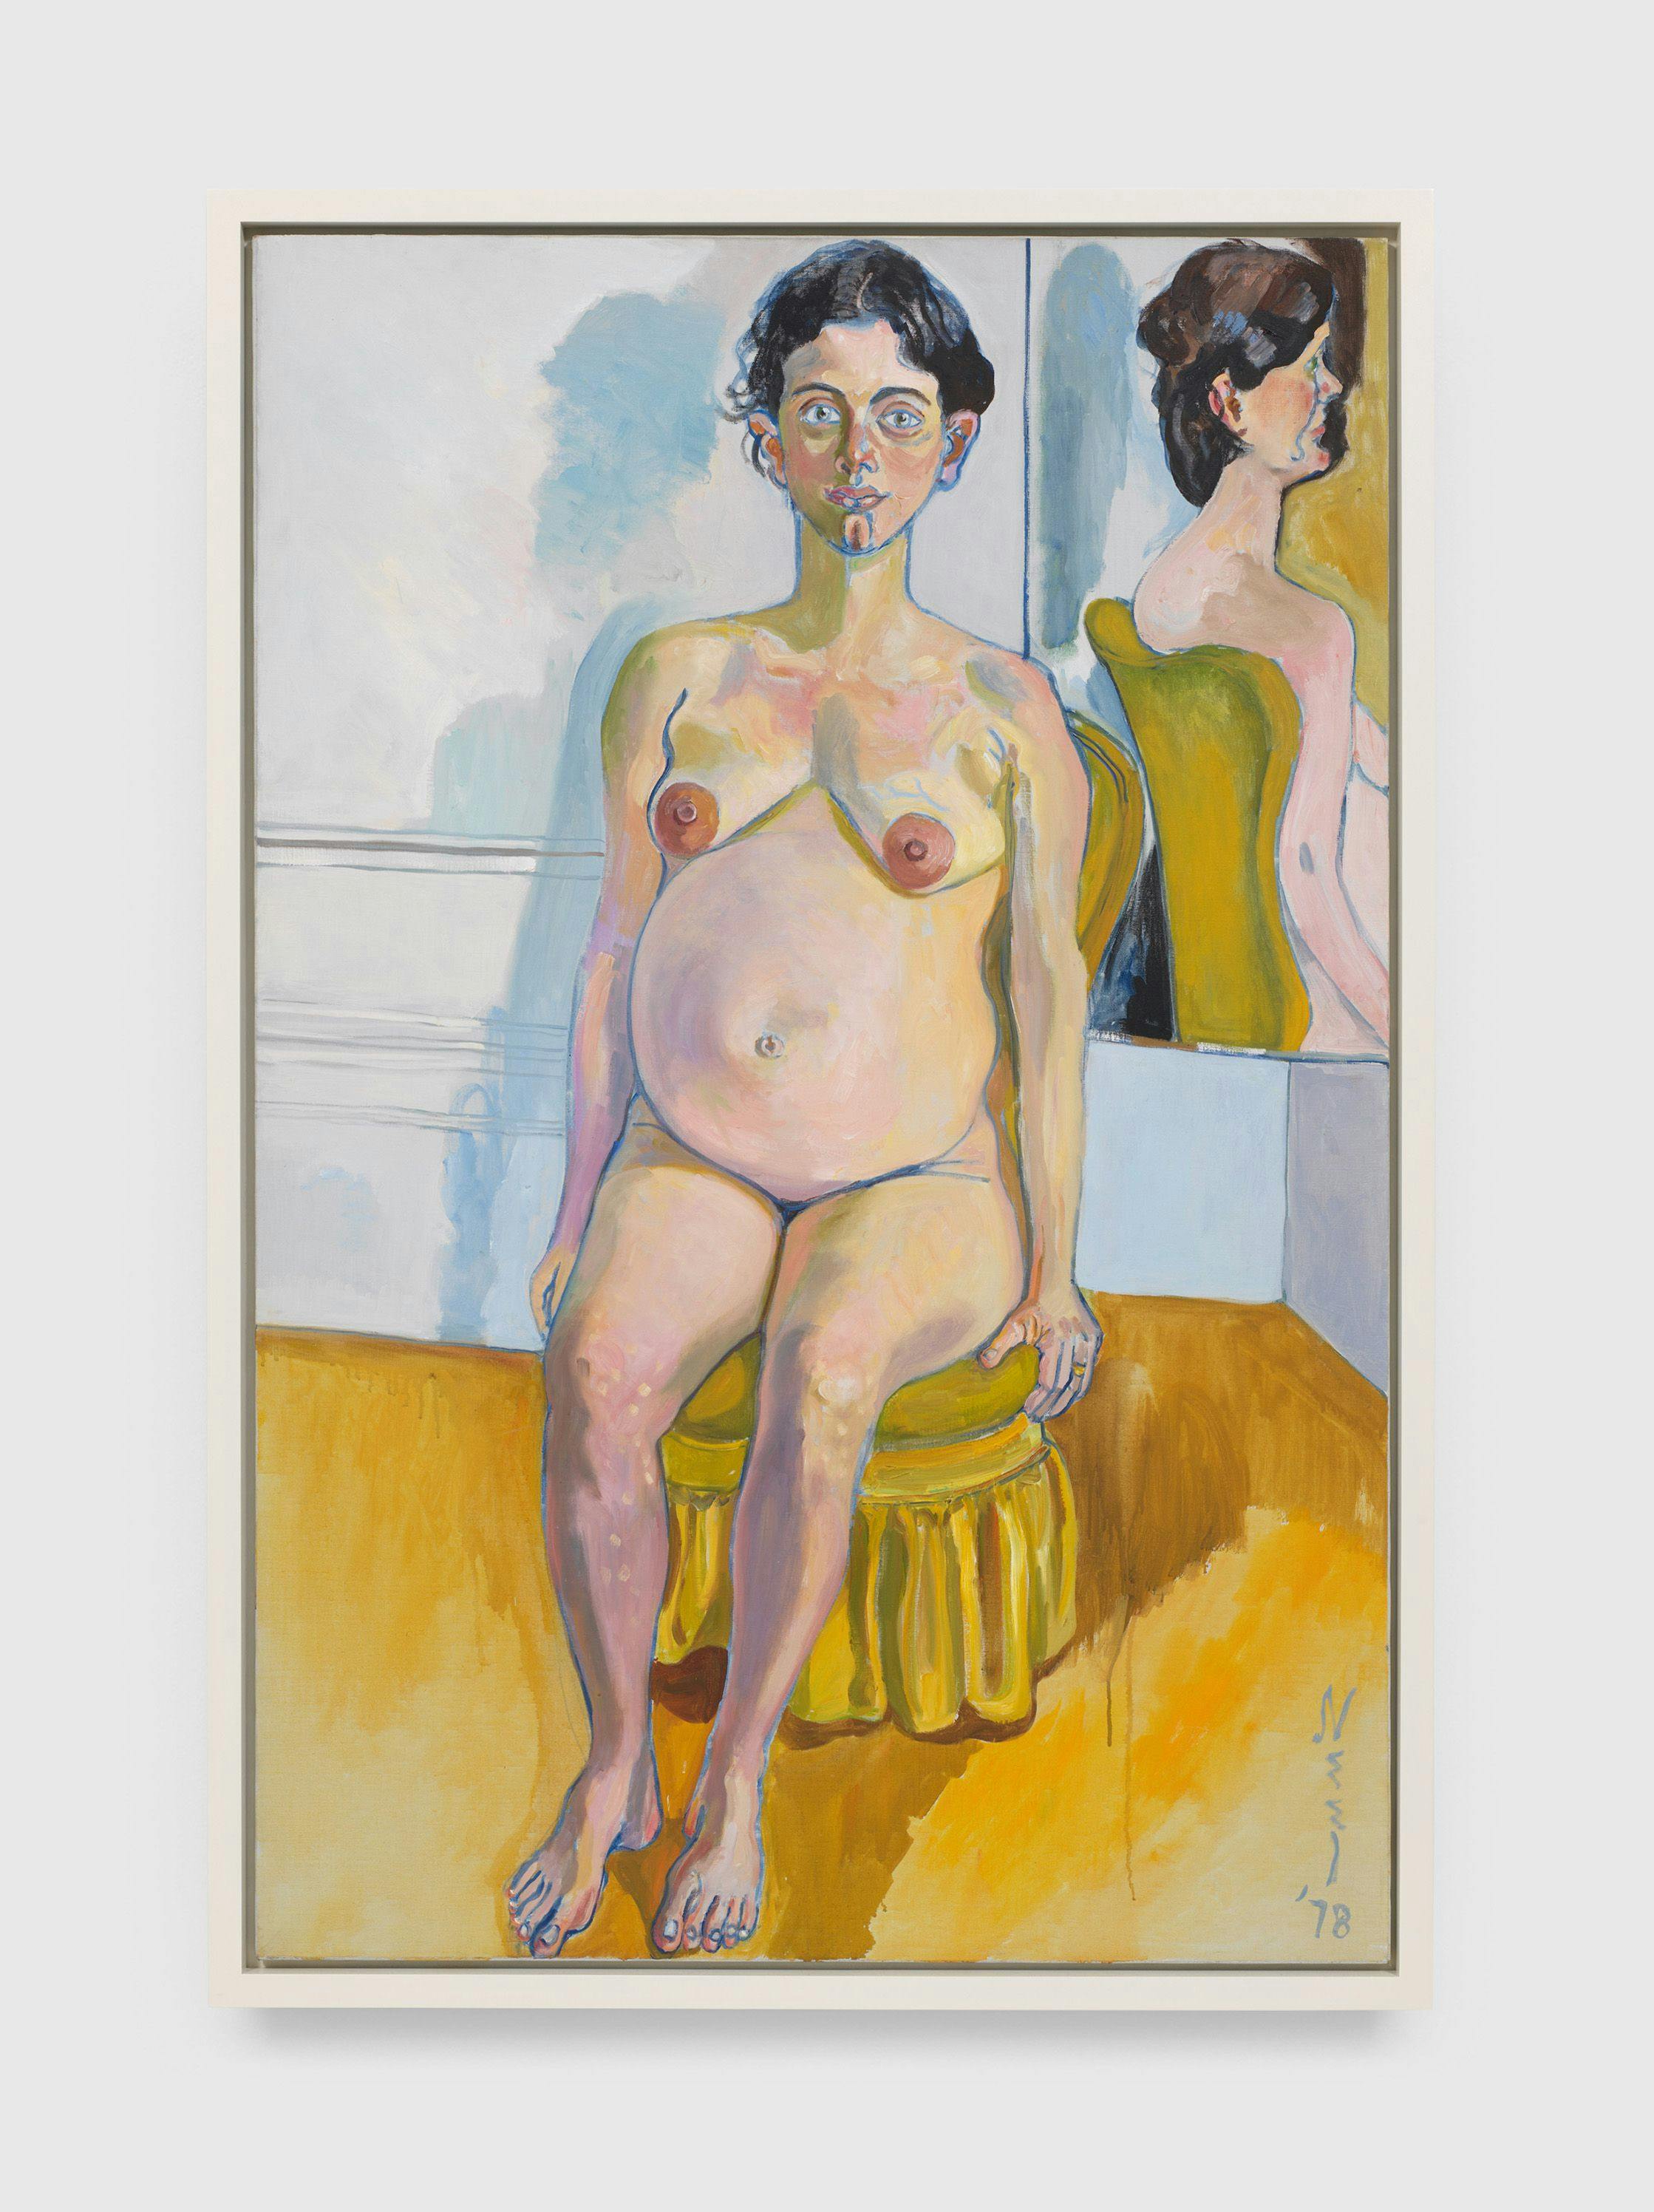 A painting by Margaret Evans, titled Pregnant, dated 1978.